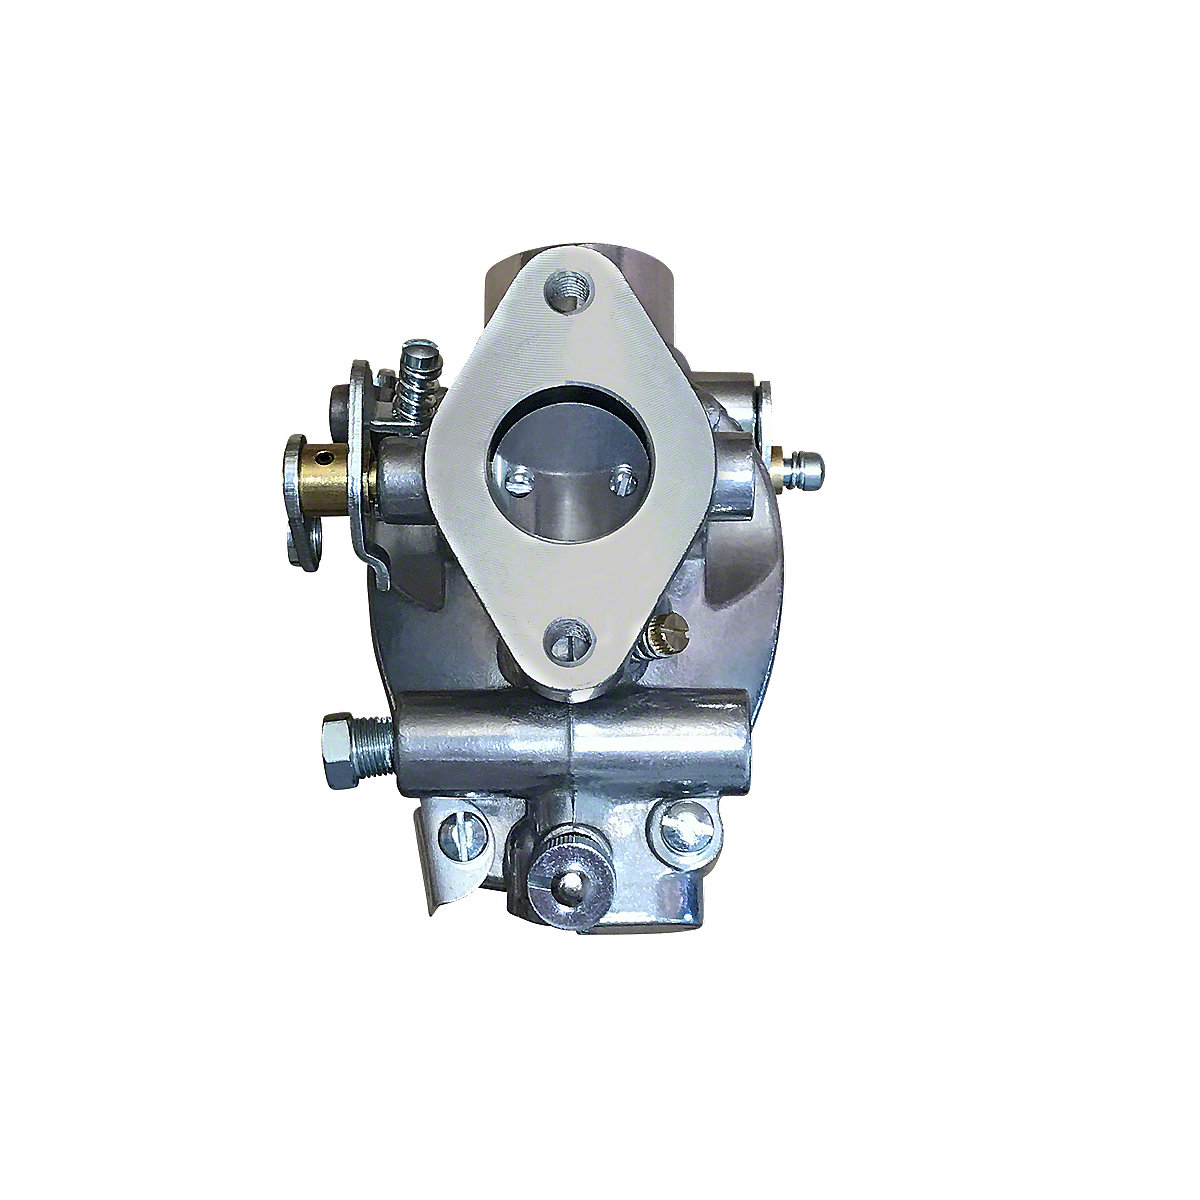 CARBURETOR (MARVEL SCHEBLER) 
 2-3/8\ C.C. BOLT HOLES 
 NEW ZENITH REPLACEMENT 
 Carburetor Manufacturer #: TSX157, 9752, TSX156, 9749, TSX319 
 International Applications: A, AV, B, BN, C, SUPER A, SUPER C     If you get this carb and do not like it,  you can return it within 30 days.   If it comes into contact with fuel, it becomes NOT RETURNABLE. 
If for any reason,  this carb smells like fuel,  it is NOT Returnable.  IF YOU DECIDE TO USE THIS CARB,  FLUSH OUT THE ENTIRE FUEL SYSTEM. 
PUT IN A NEW FUEL FILTER AND CLEAN OUT THE FUEL PUMP BOWL.  THE SMALLEST AMOUNT OF DEBRIS IN THE FUEL LINES CAN DISABLE YOUR CARB.    NO CARB THAT HAS COME INTO CONTACT WITH FUEL IS RETURNABLE.